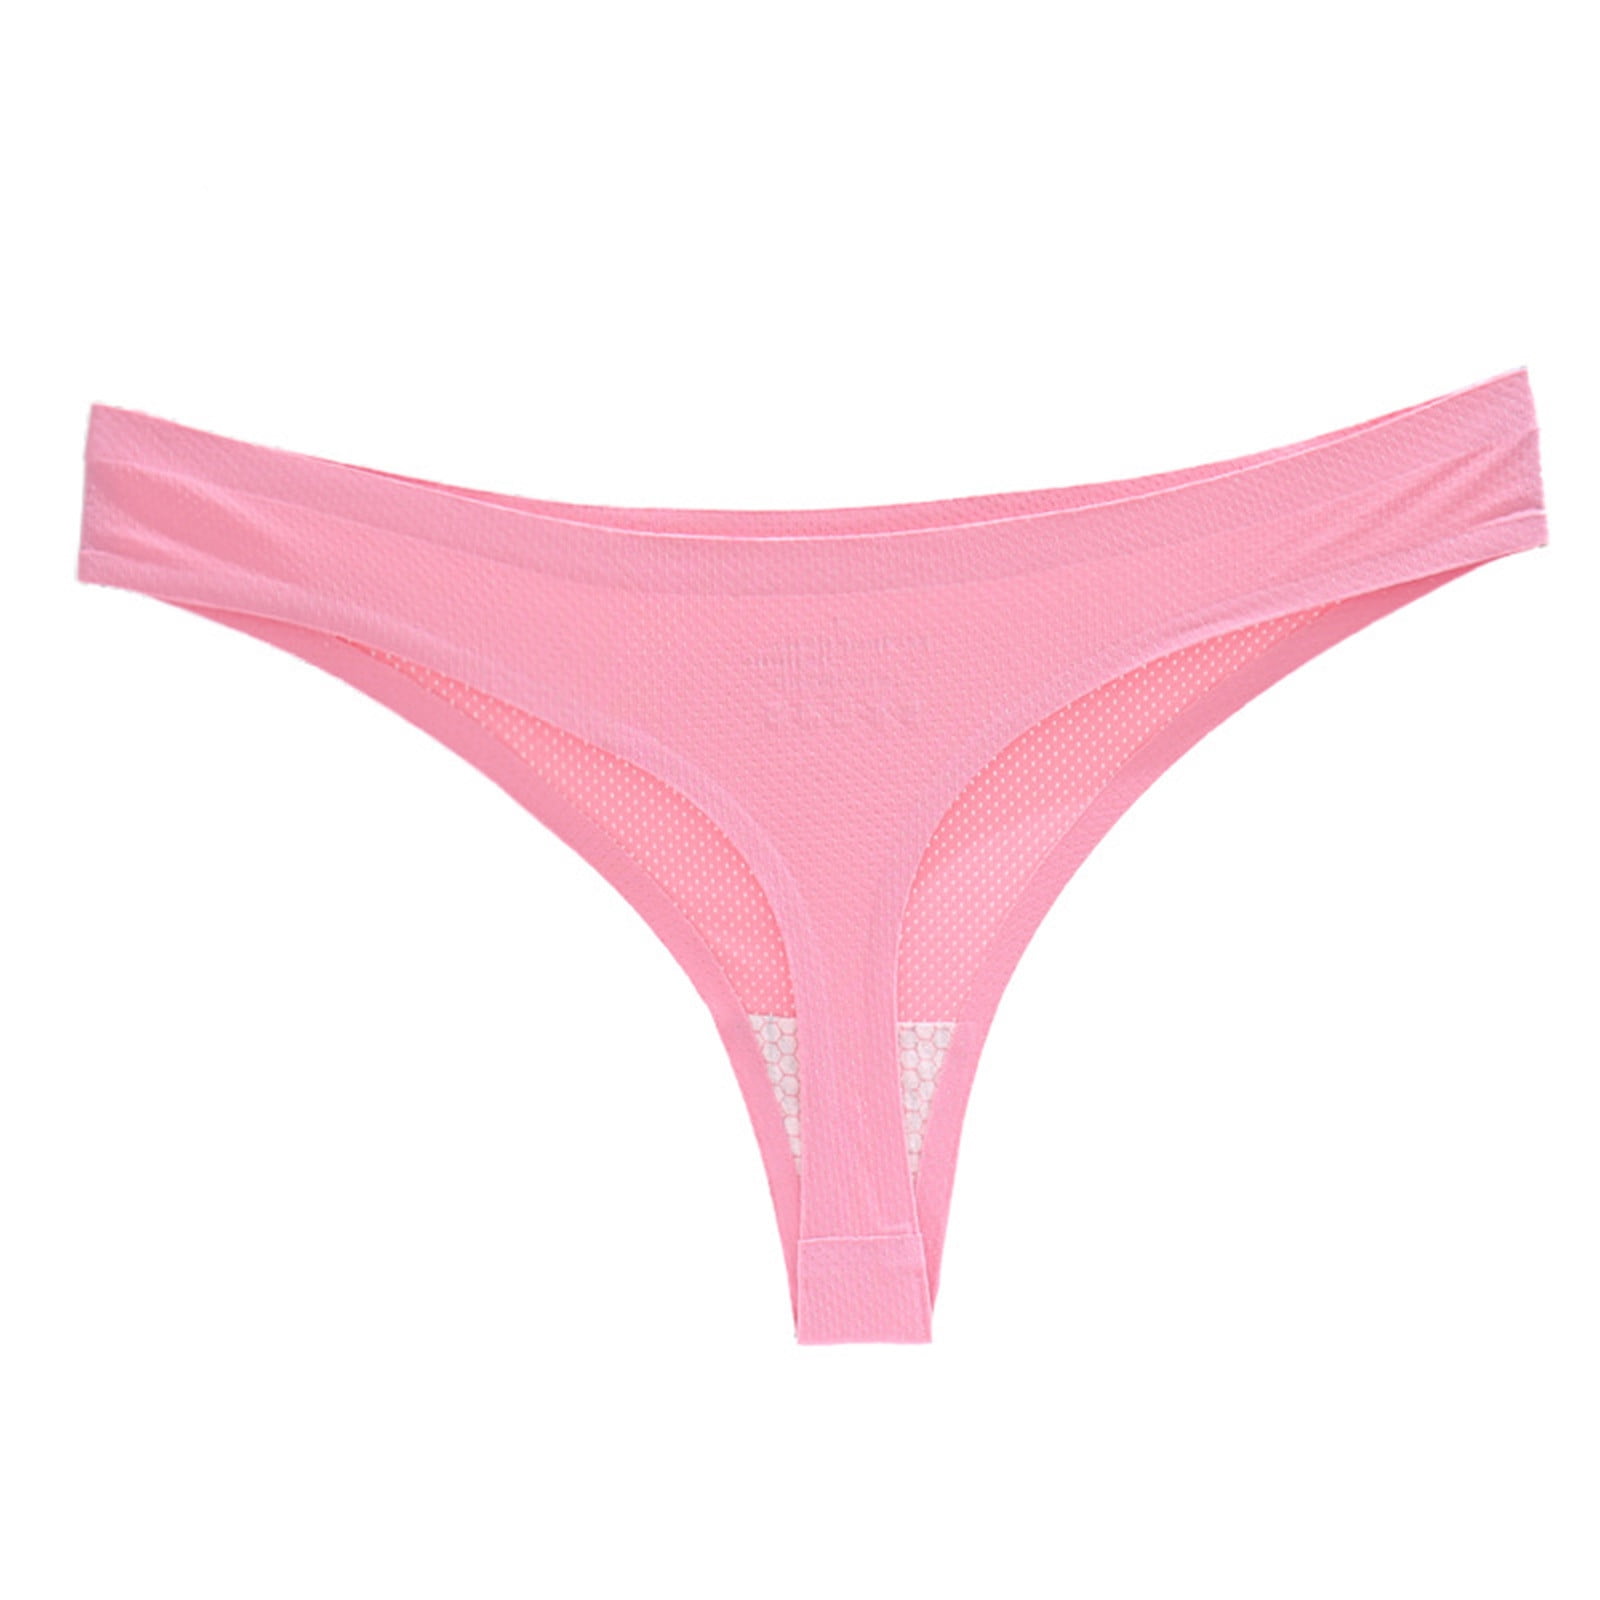 FLIPCHARGE classic Hot Pink colour Thong panty for Women and Girls panties,  made up of soft comfortable Cotton Fabric, low Rise,Thong, G string panty